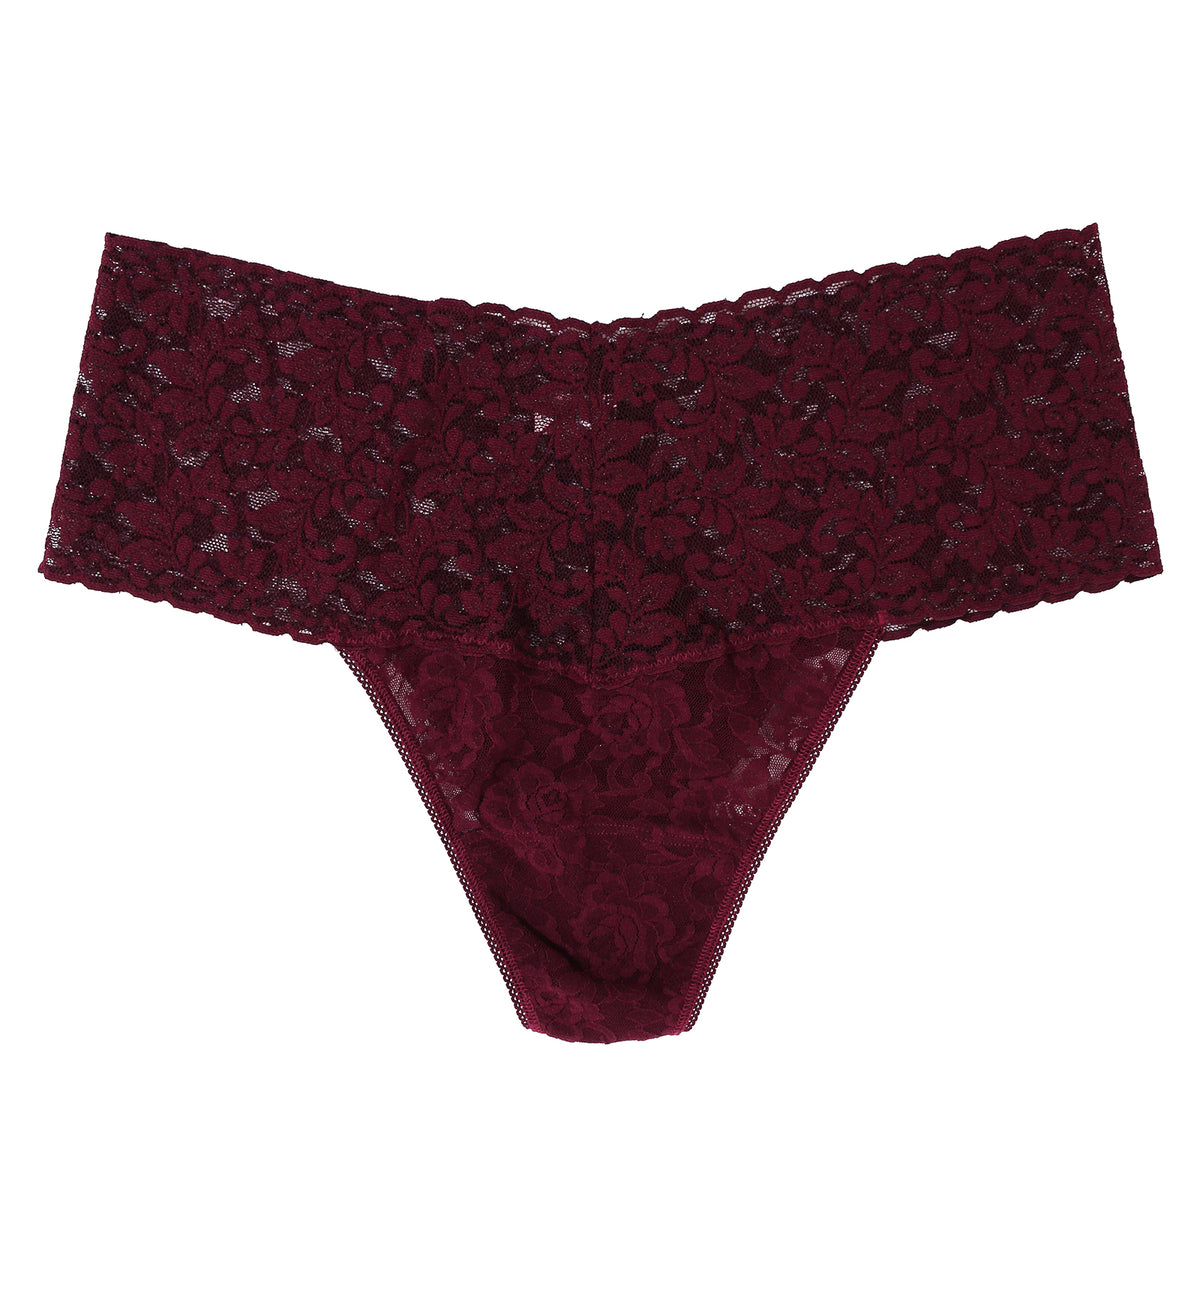 Hanky Panky Signature Lace PLUS Retro Thong (9K1926X),Dried Cherry - Dried Cherry,One Size